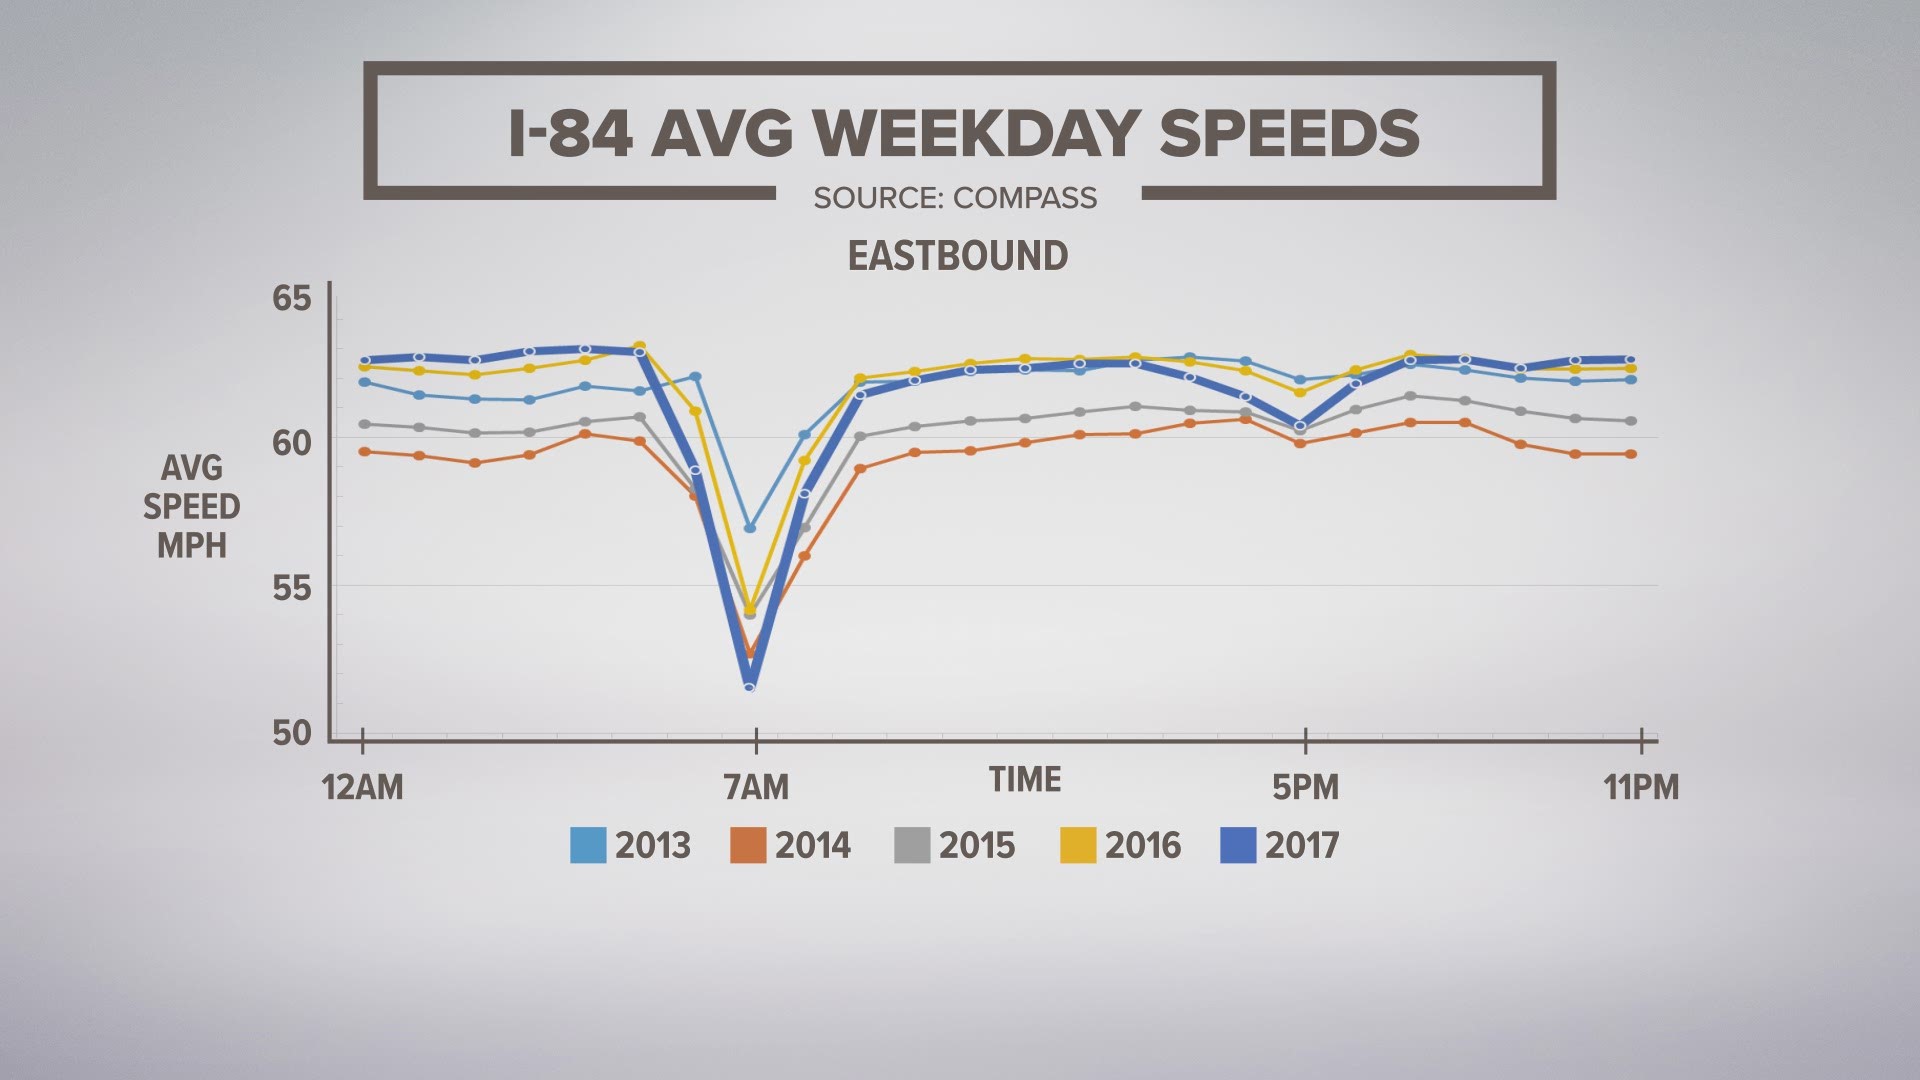 See exactly when the average weekday speeds on the I-84 between 2013 and 2017.